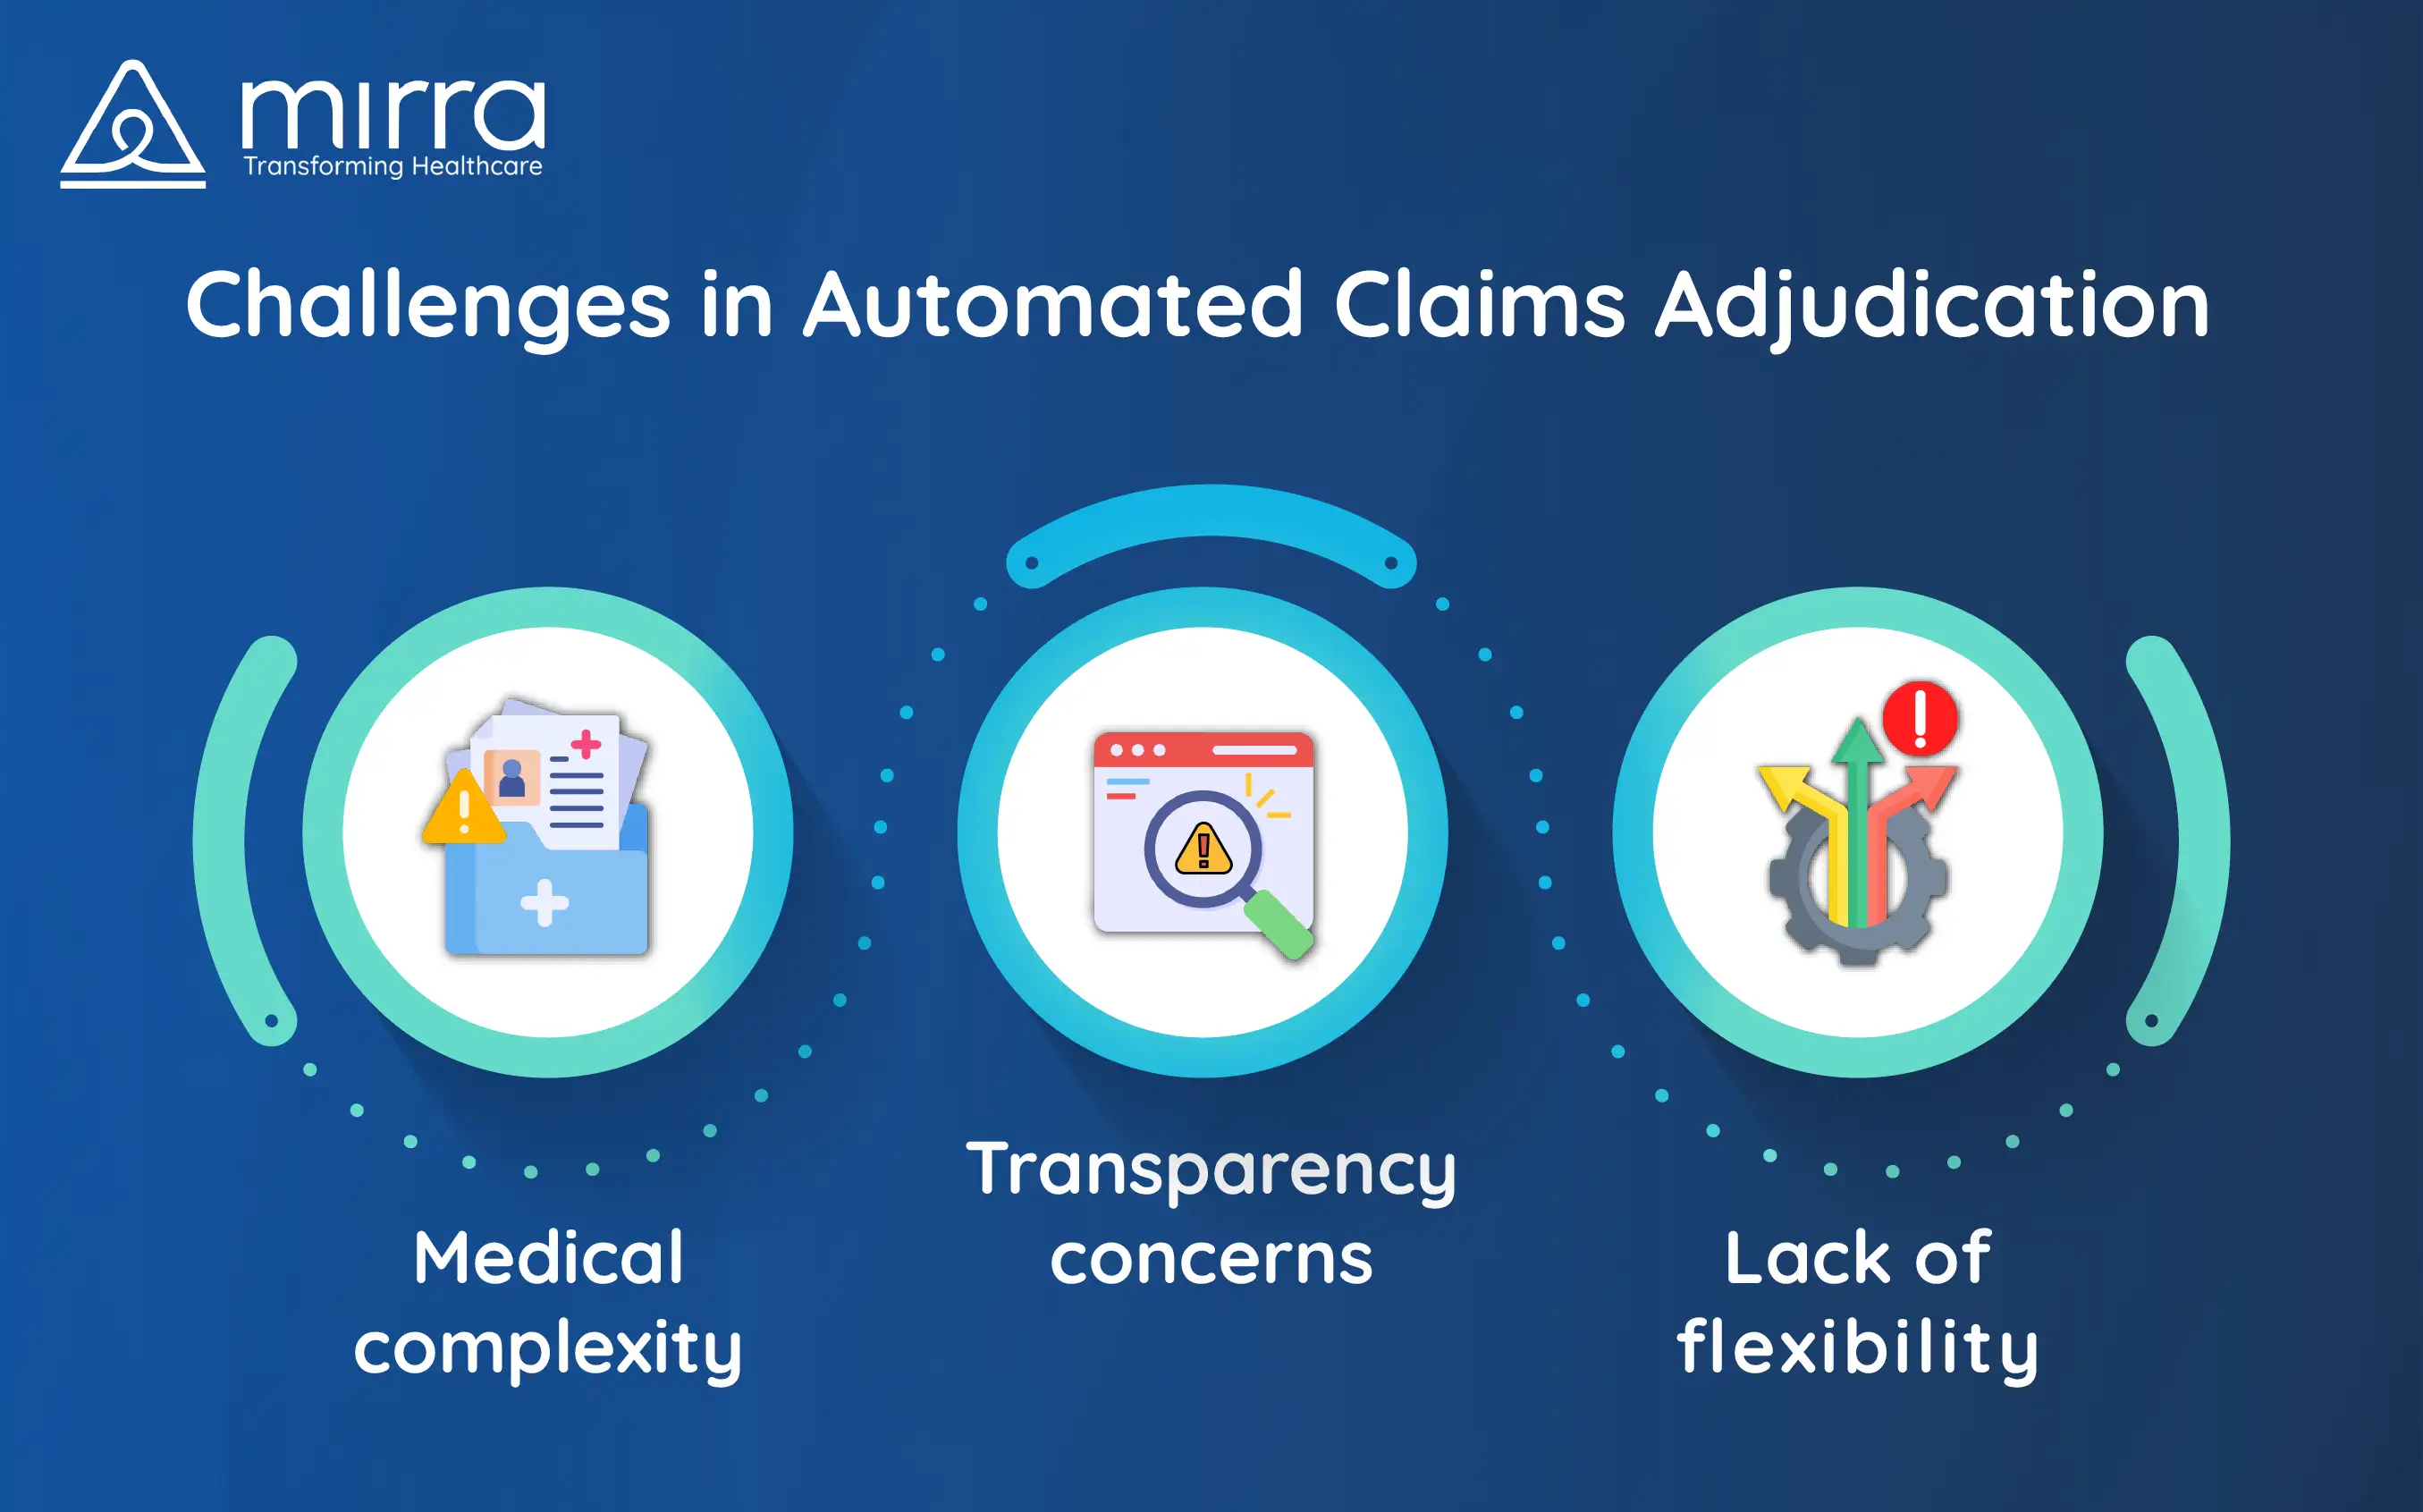 Challenges in Automated Claim Adjudication